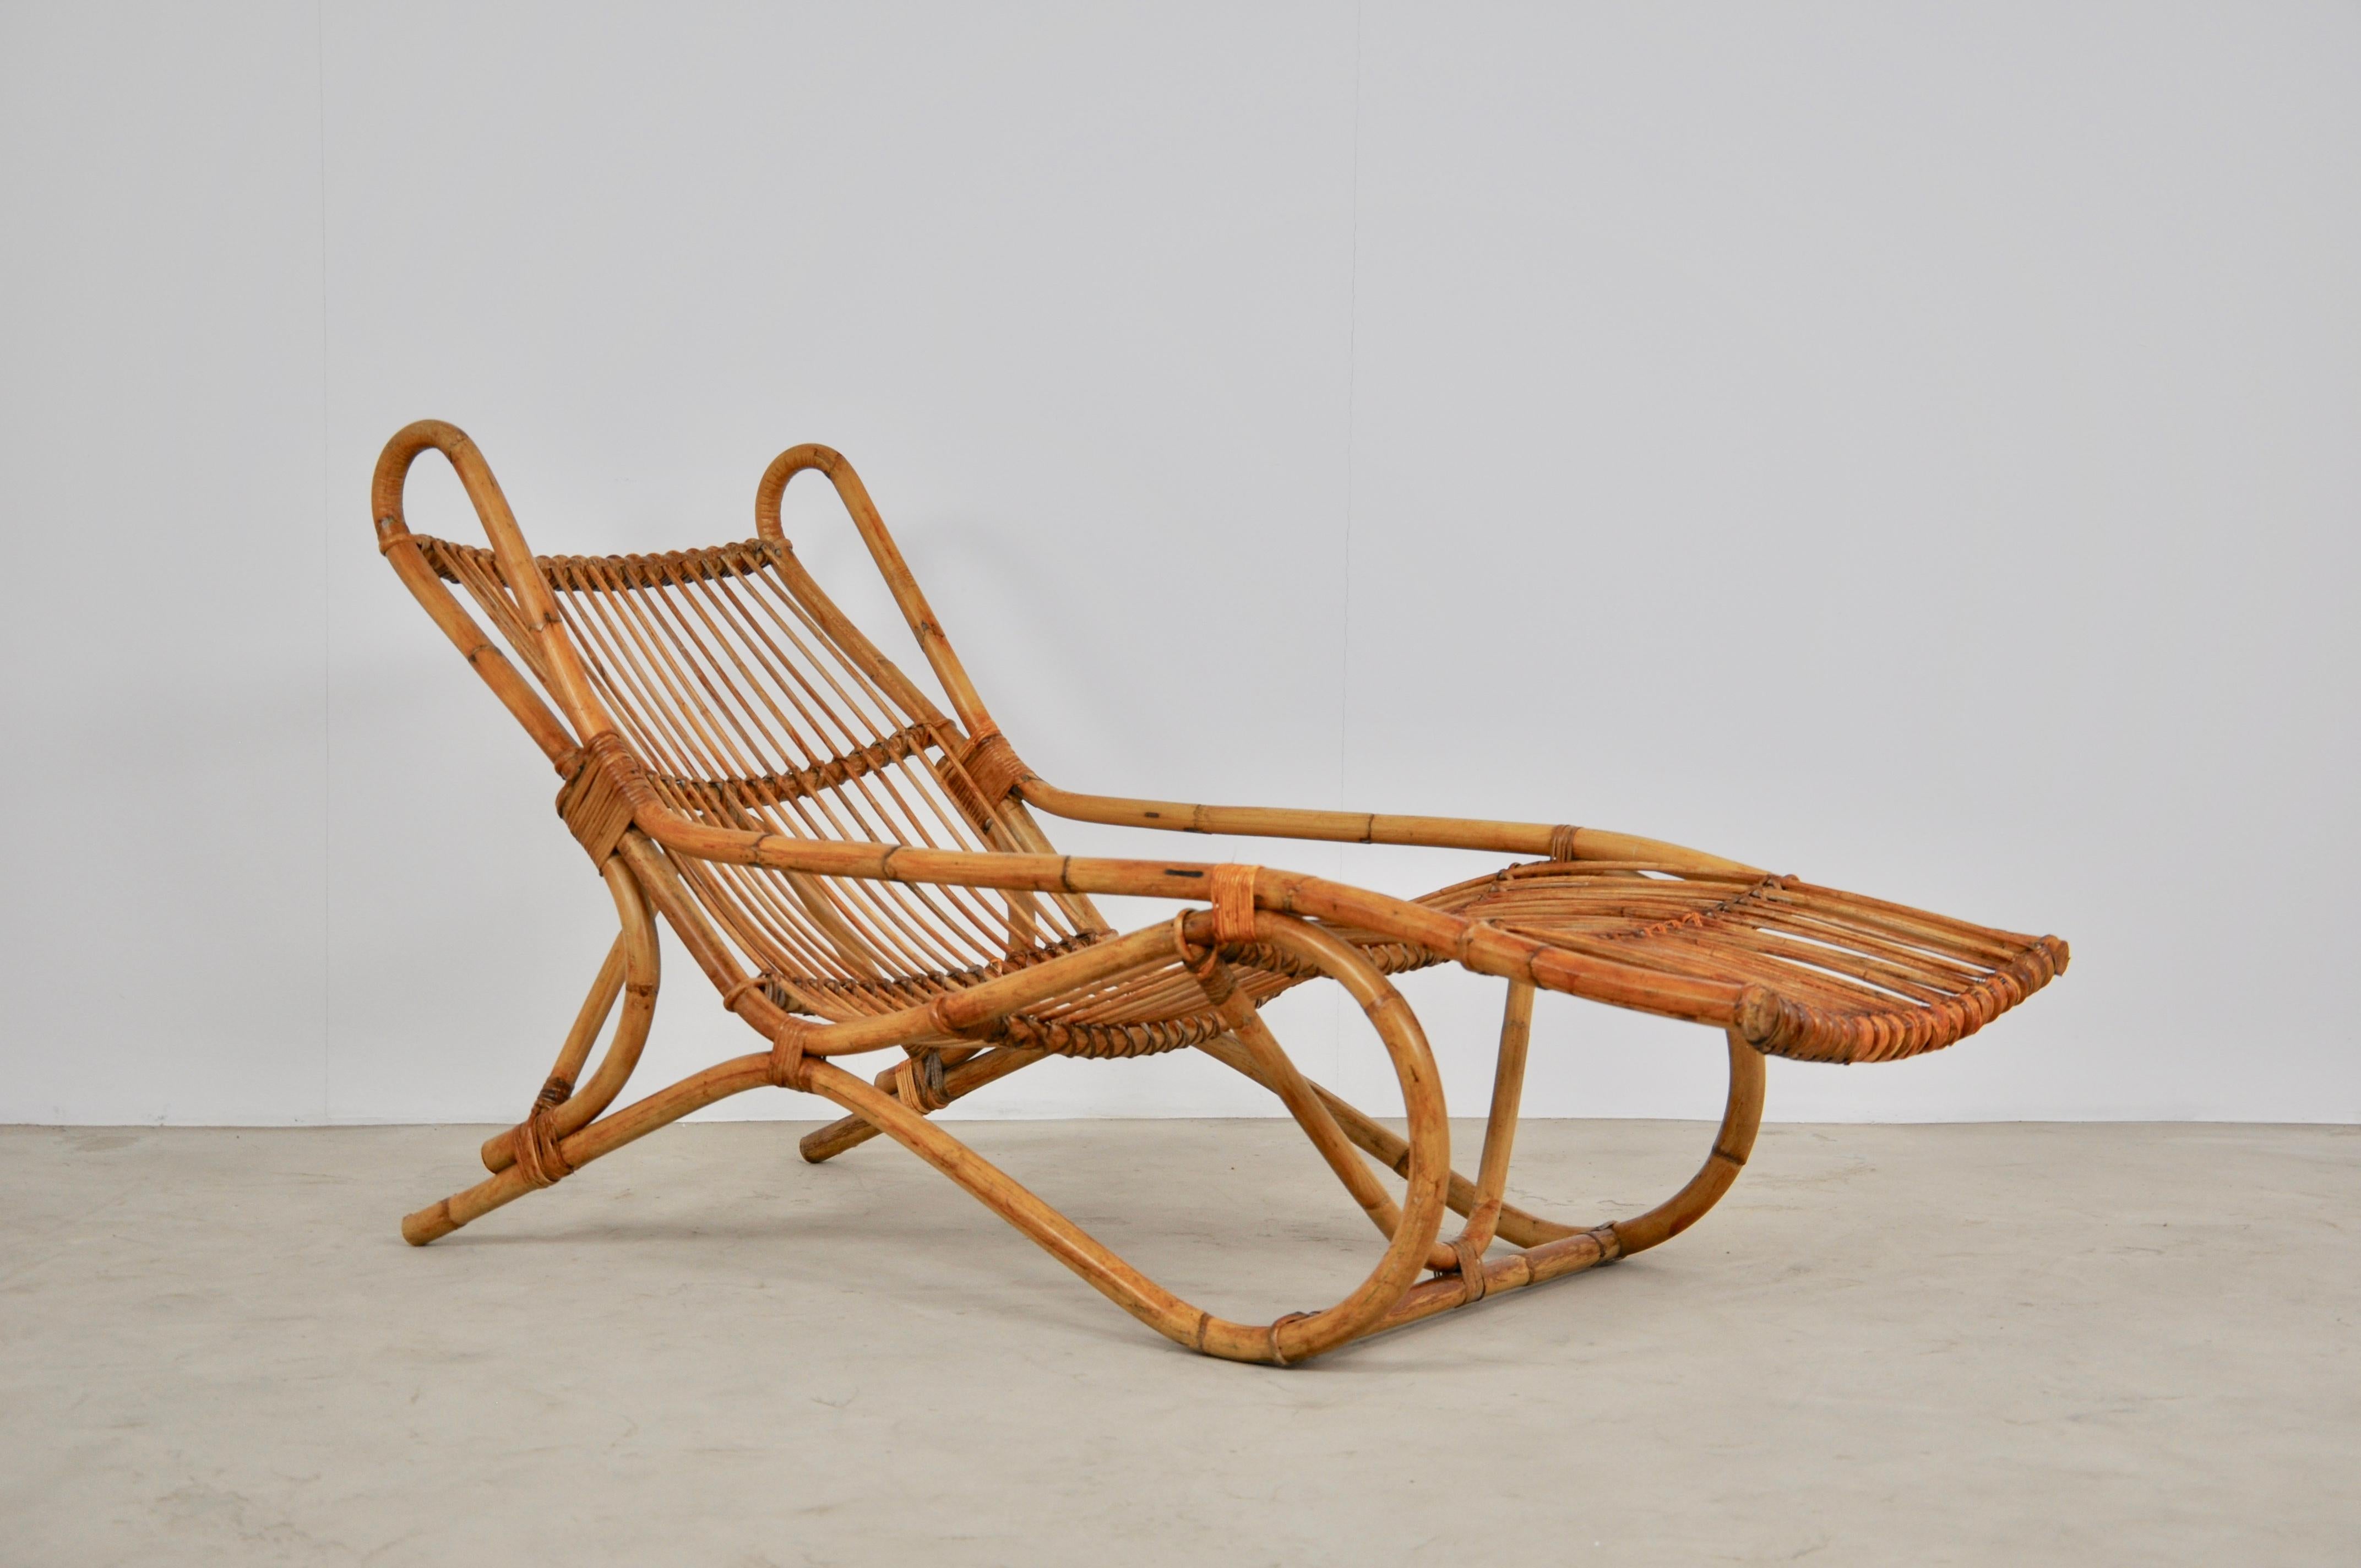 Rattan deckchair
Measure: Seat height 25cm
Wear due to time and age of the chair.